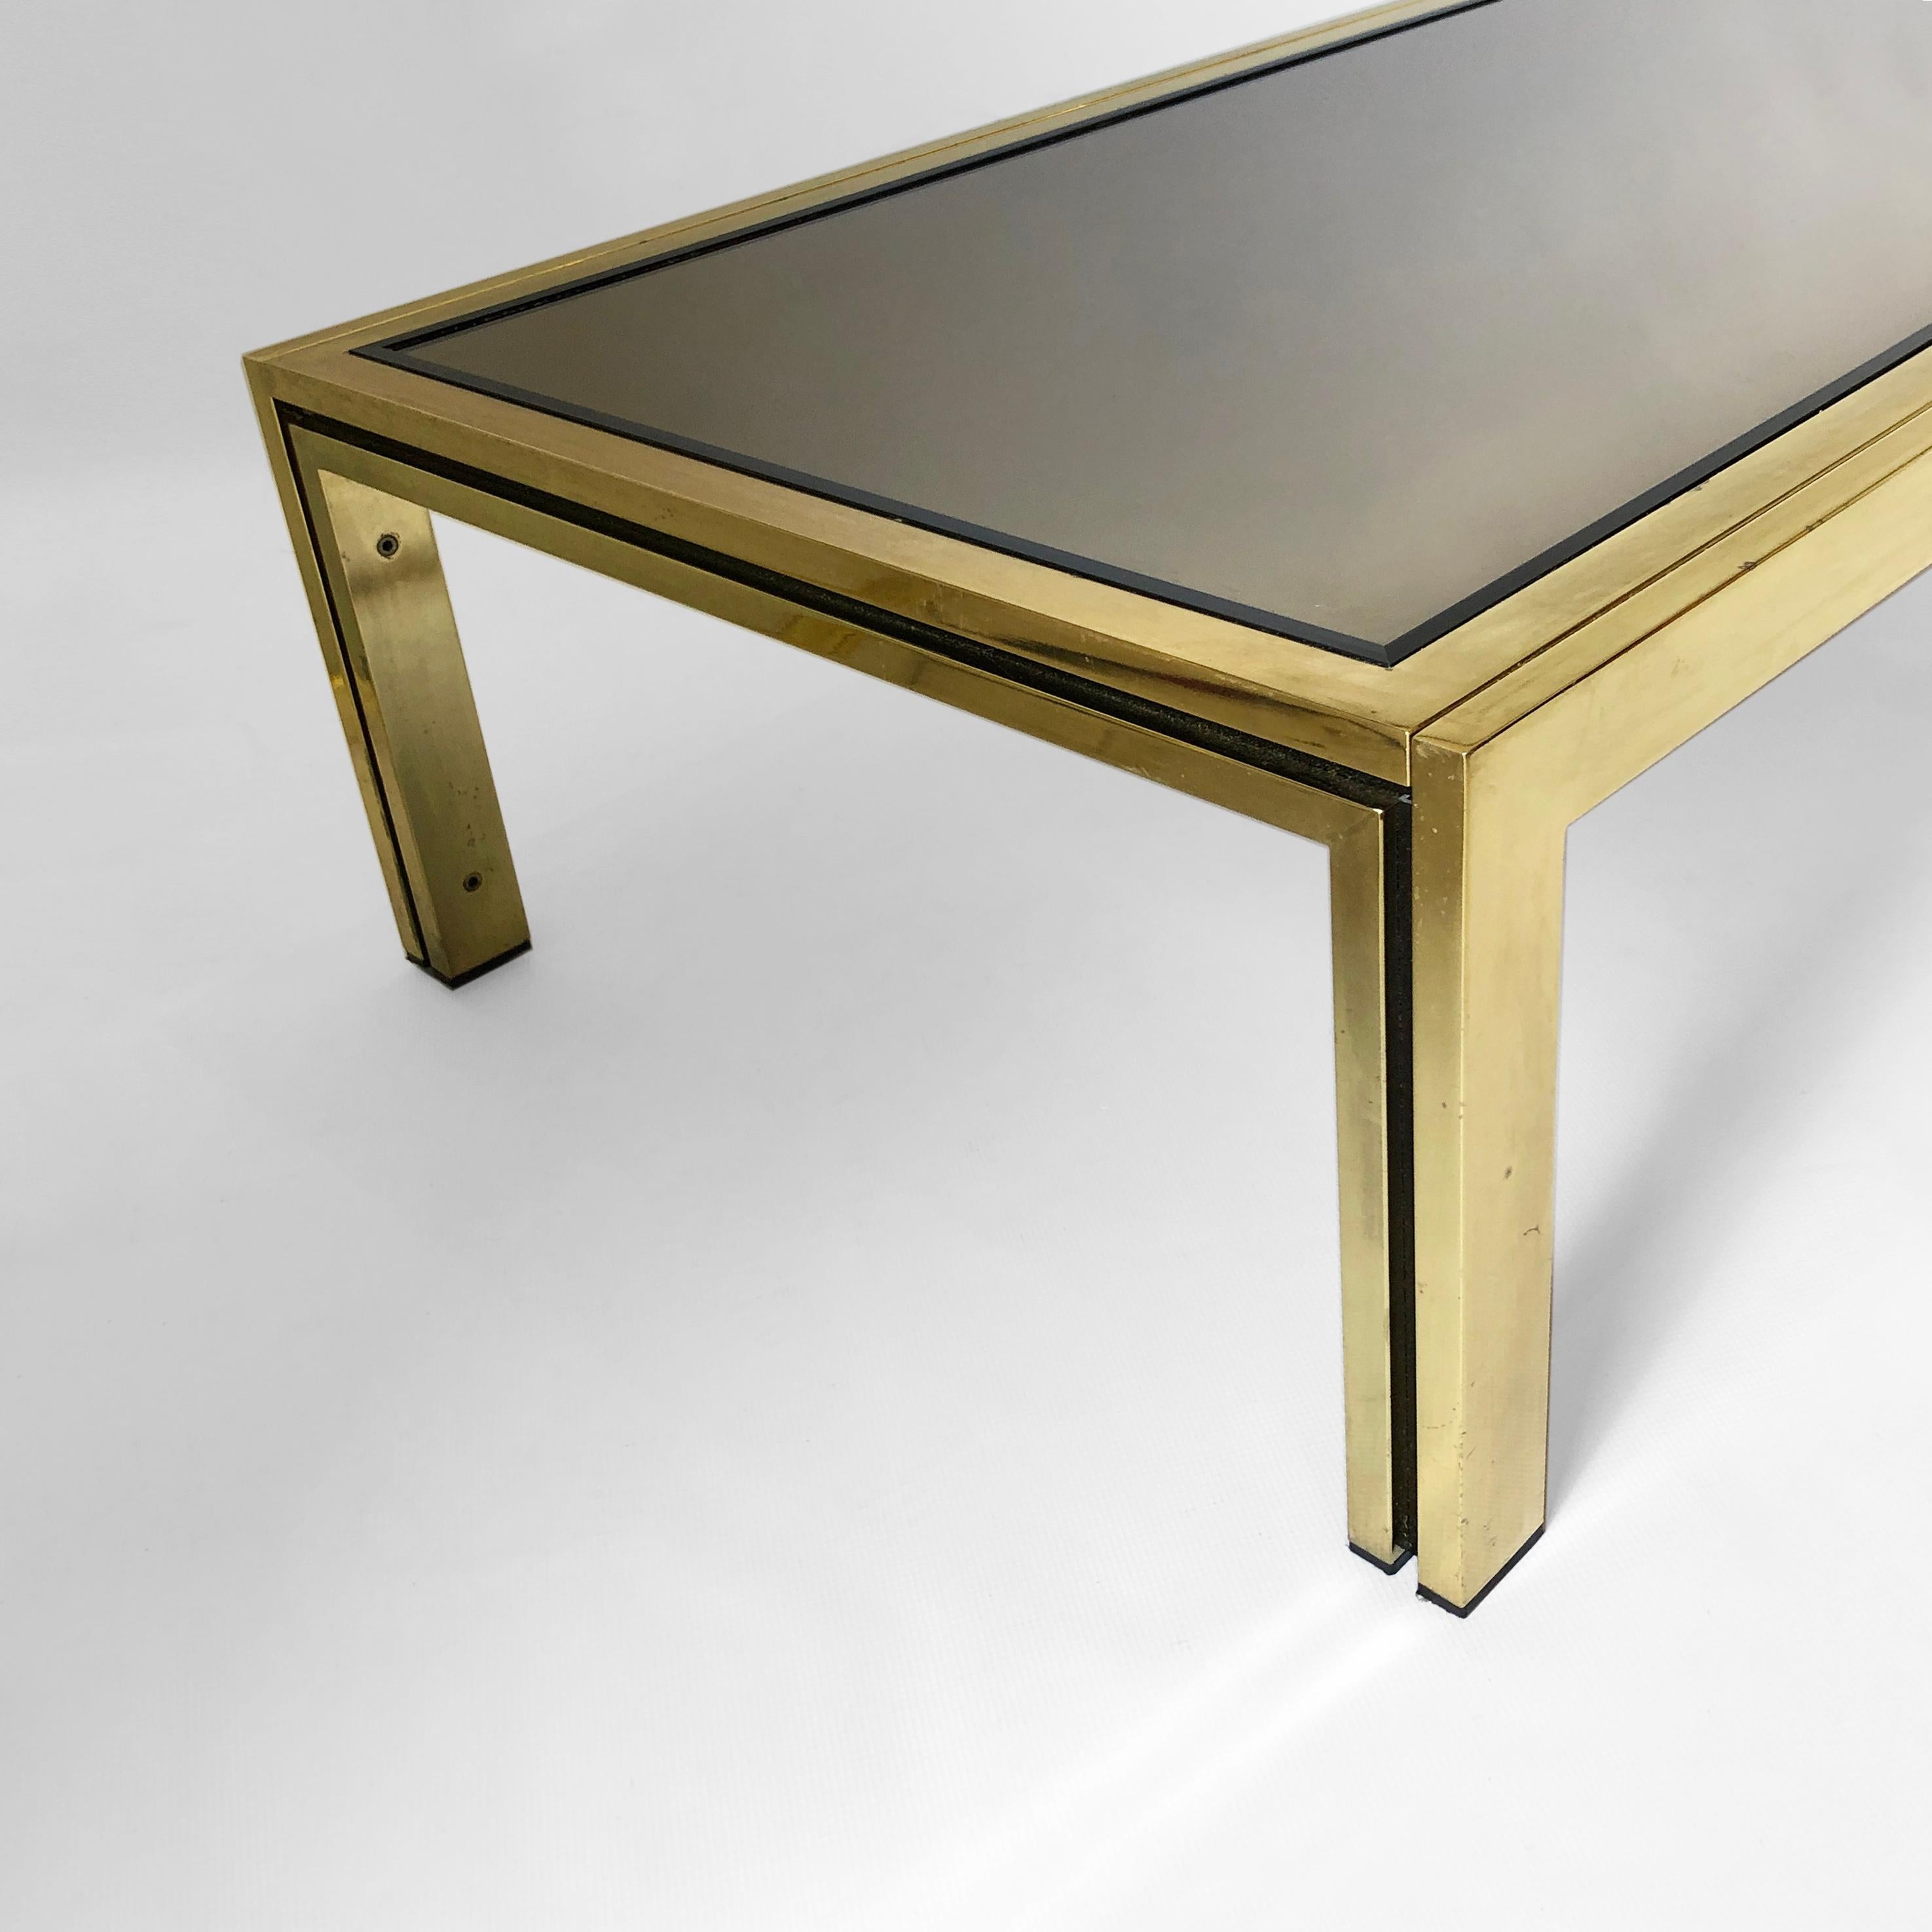 Late 20th Century Brass Smoked Mirror Rectangular Coffee Table 1970s Hollywood Regency Renato Zevi For Sale